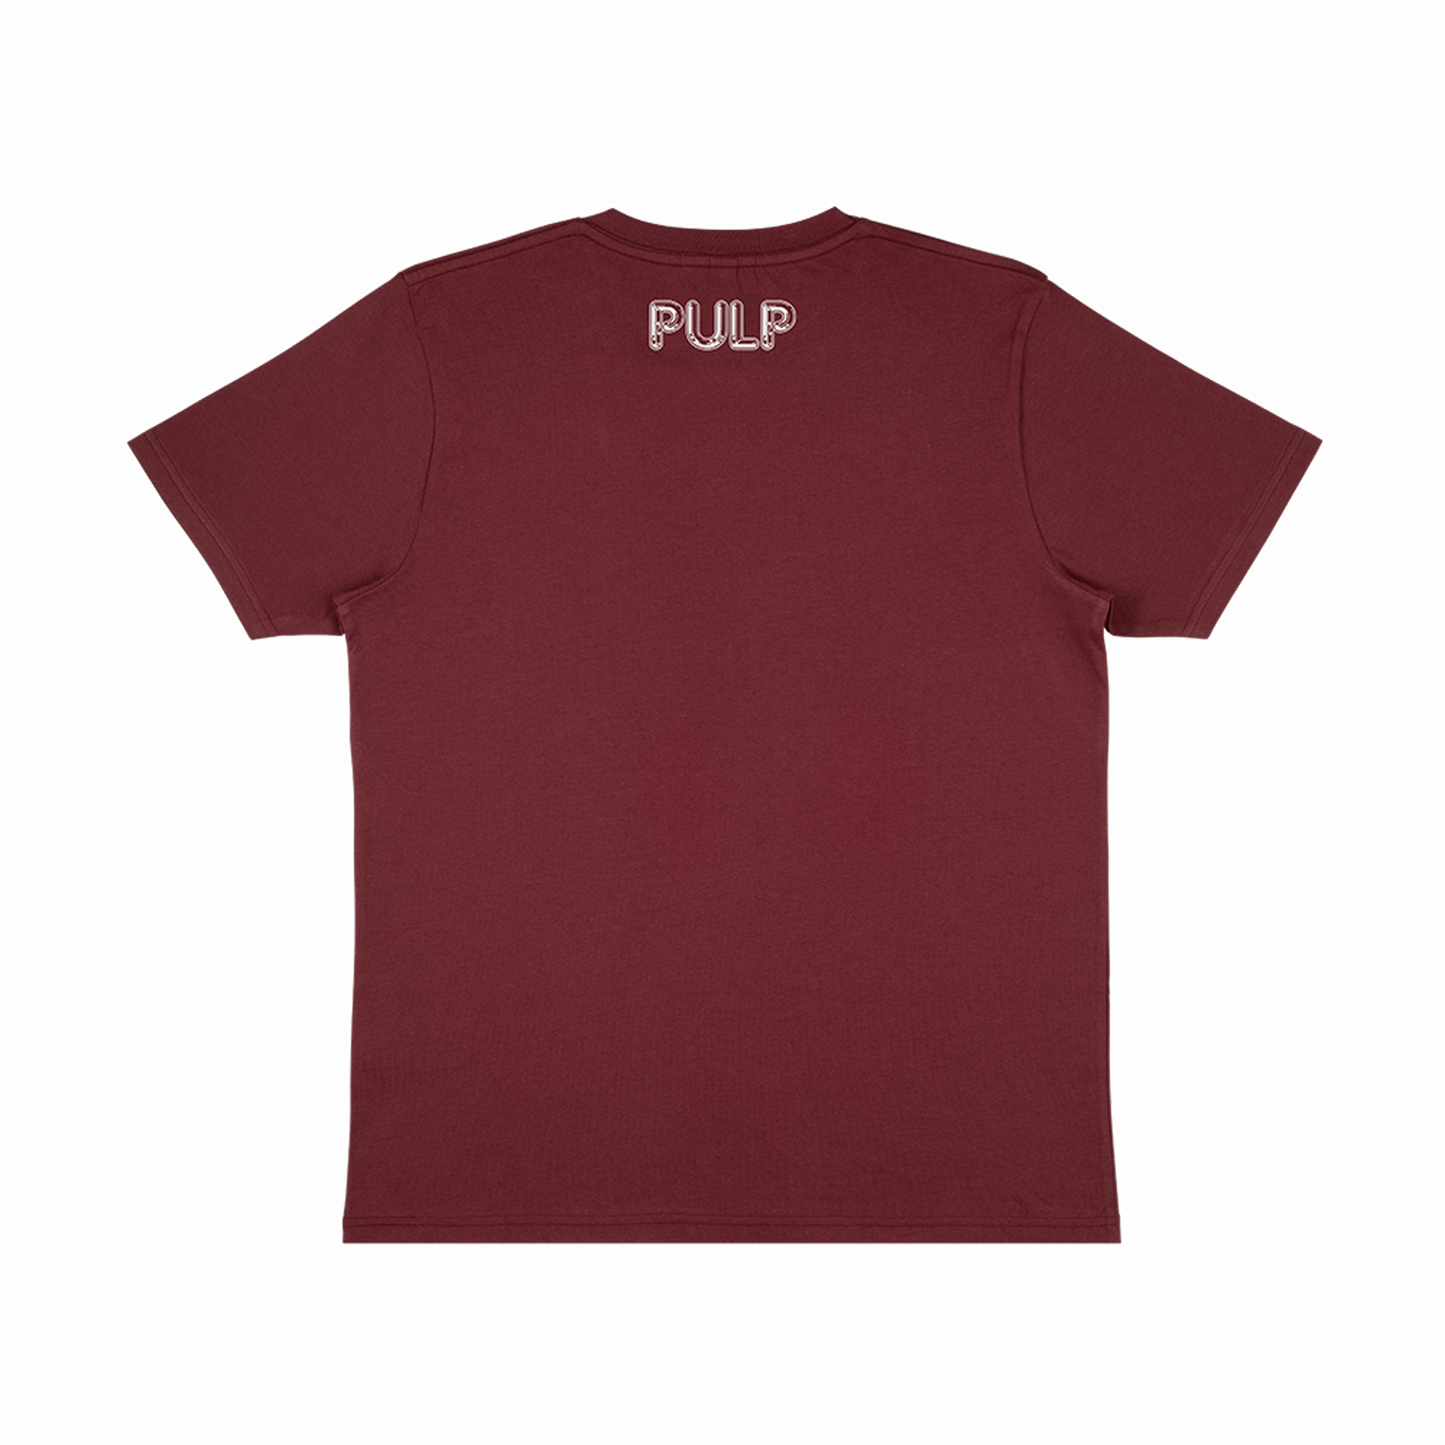 Burgundy This Is What T-Shirt